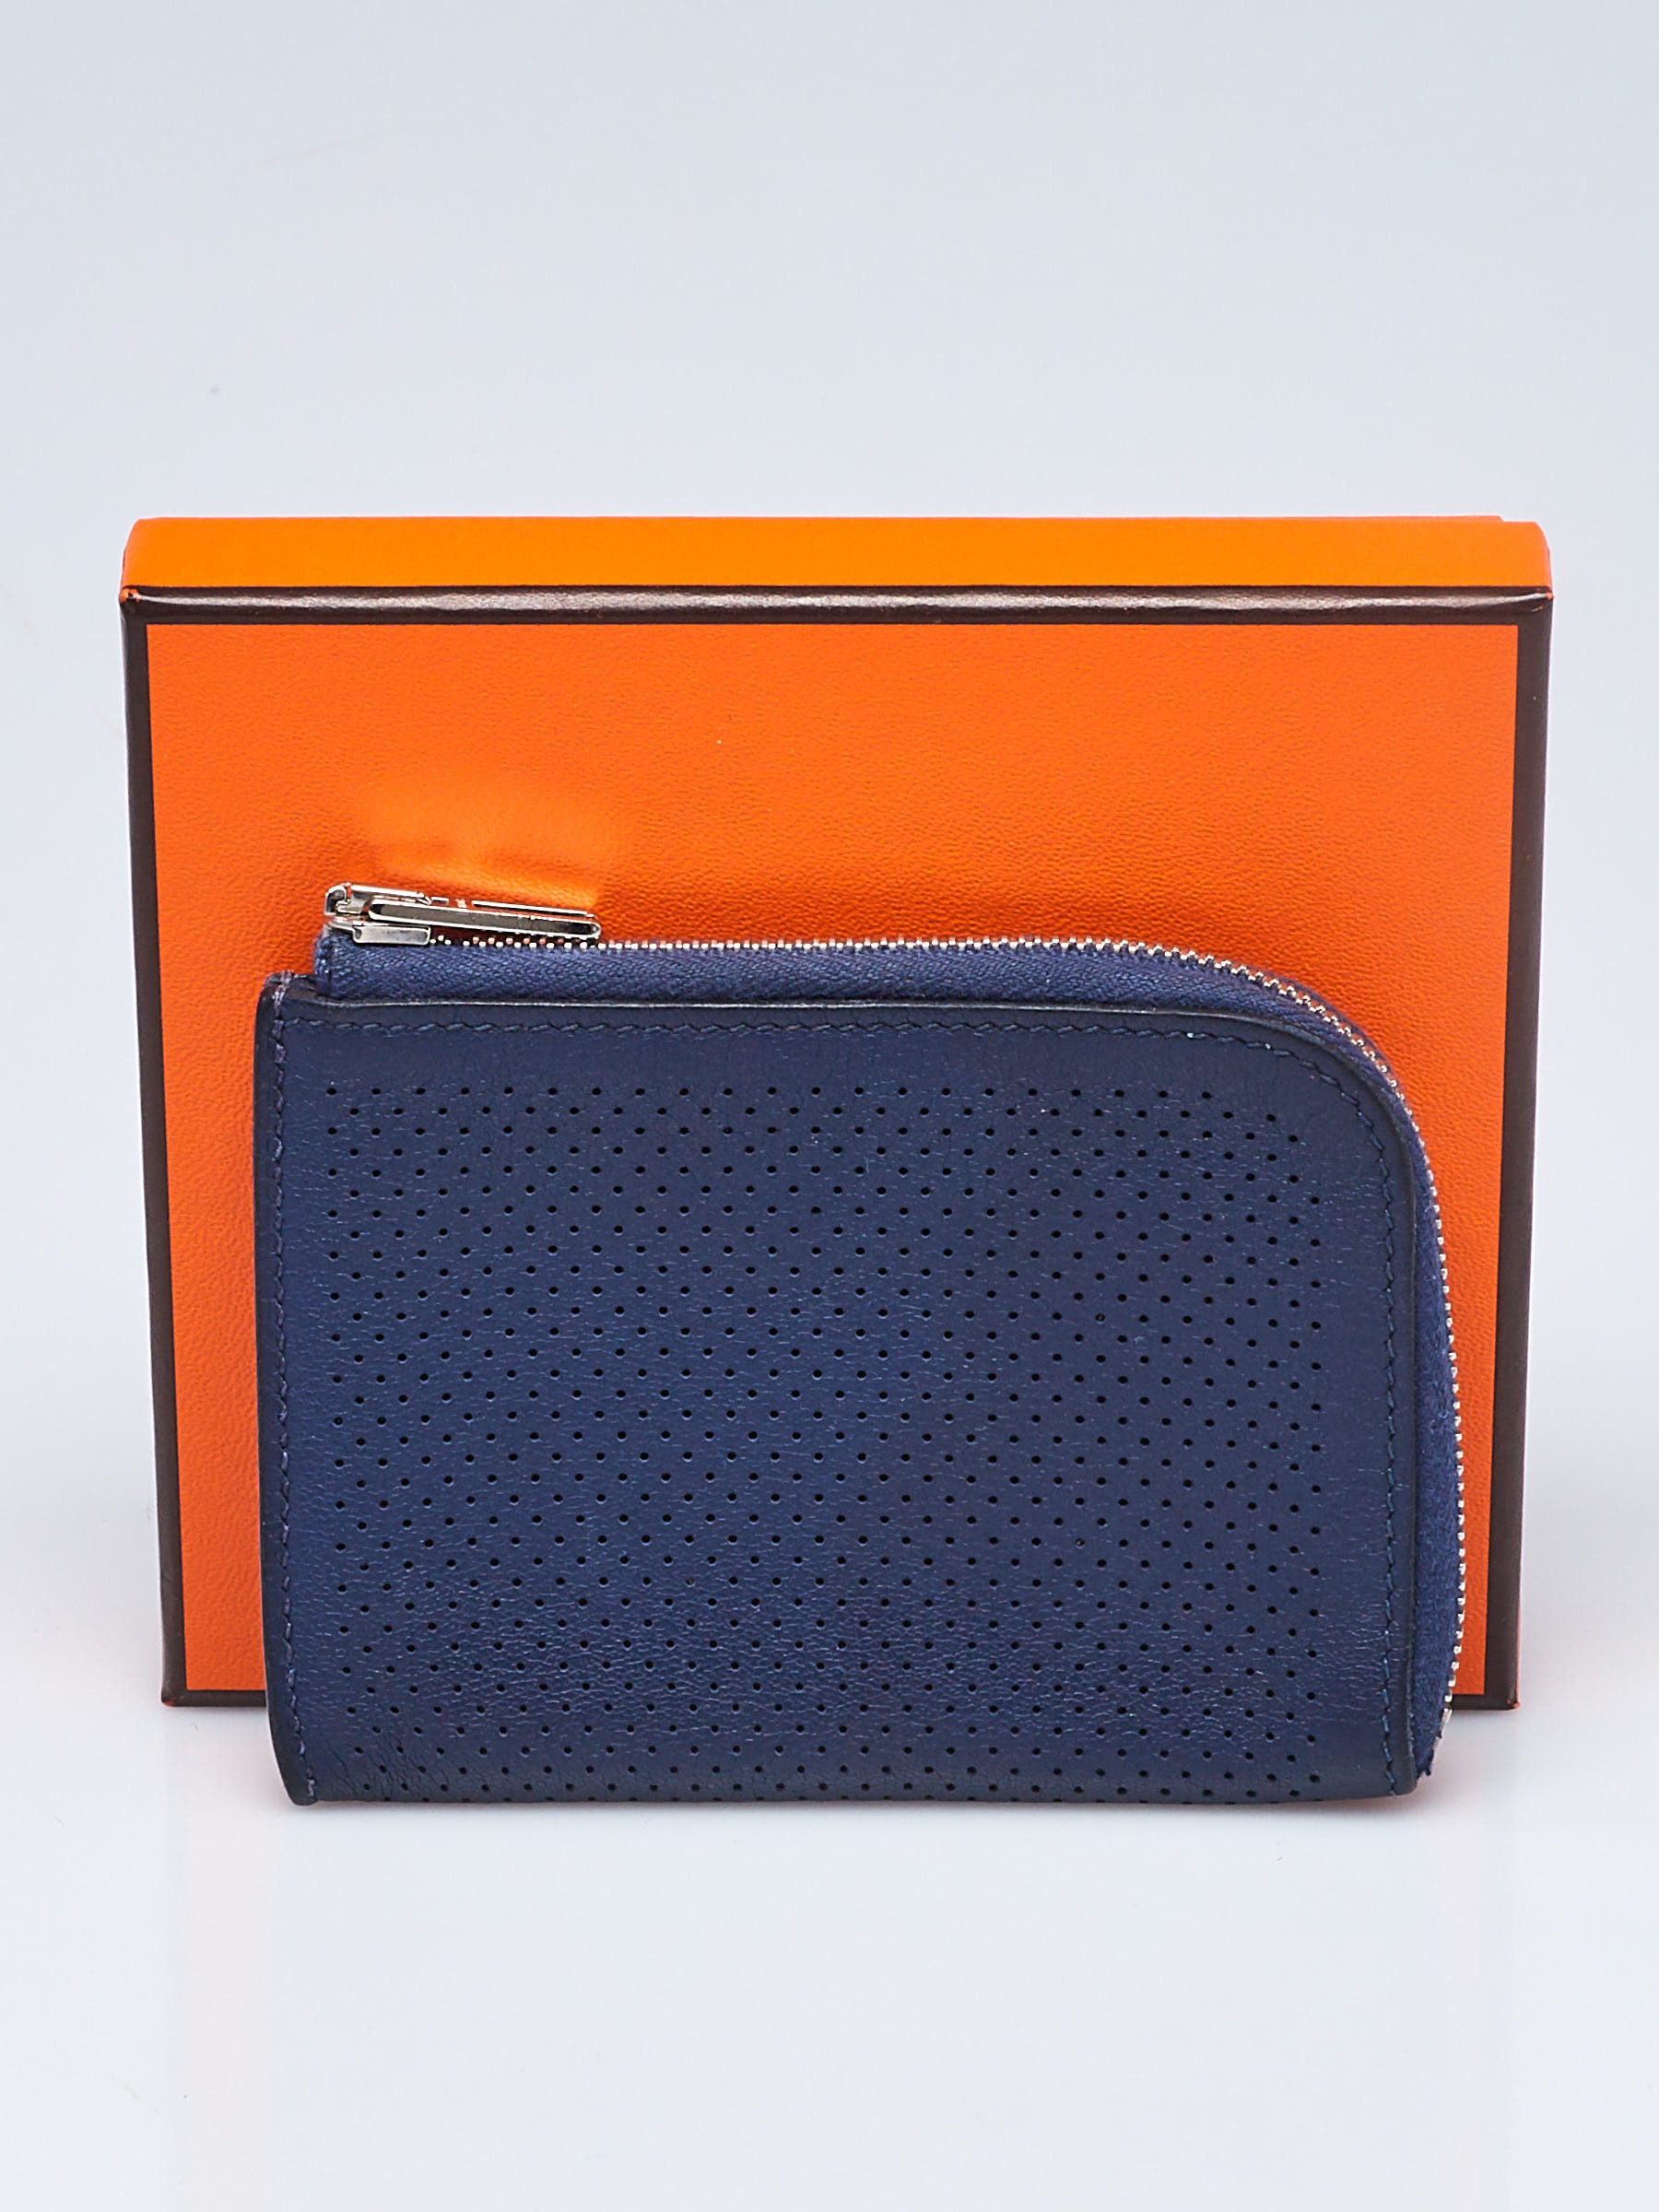 Hermes Blue Ocean Perforated Leather Remix ID Card Holder